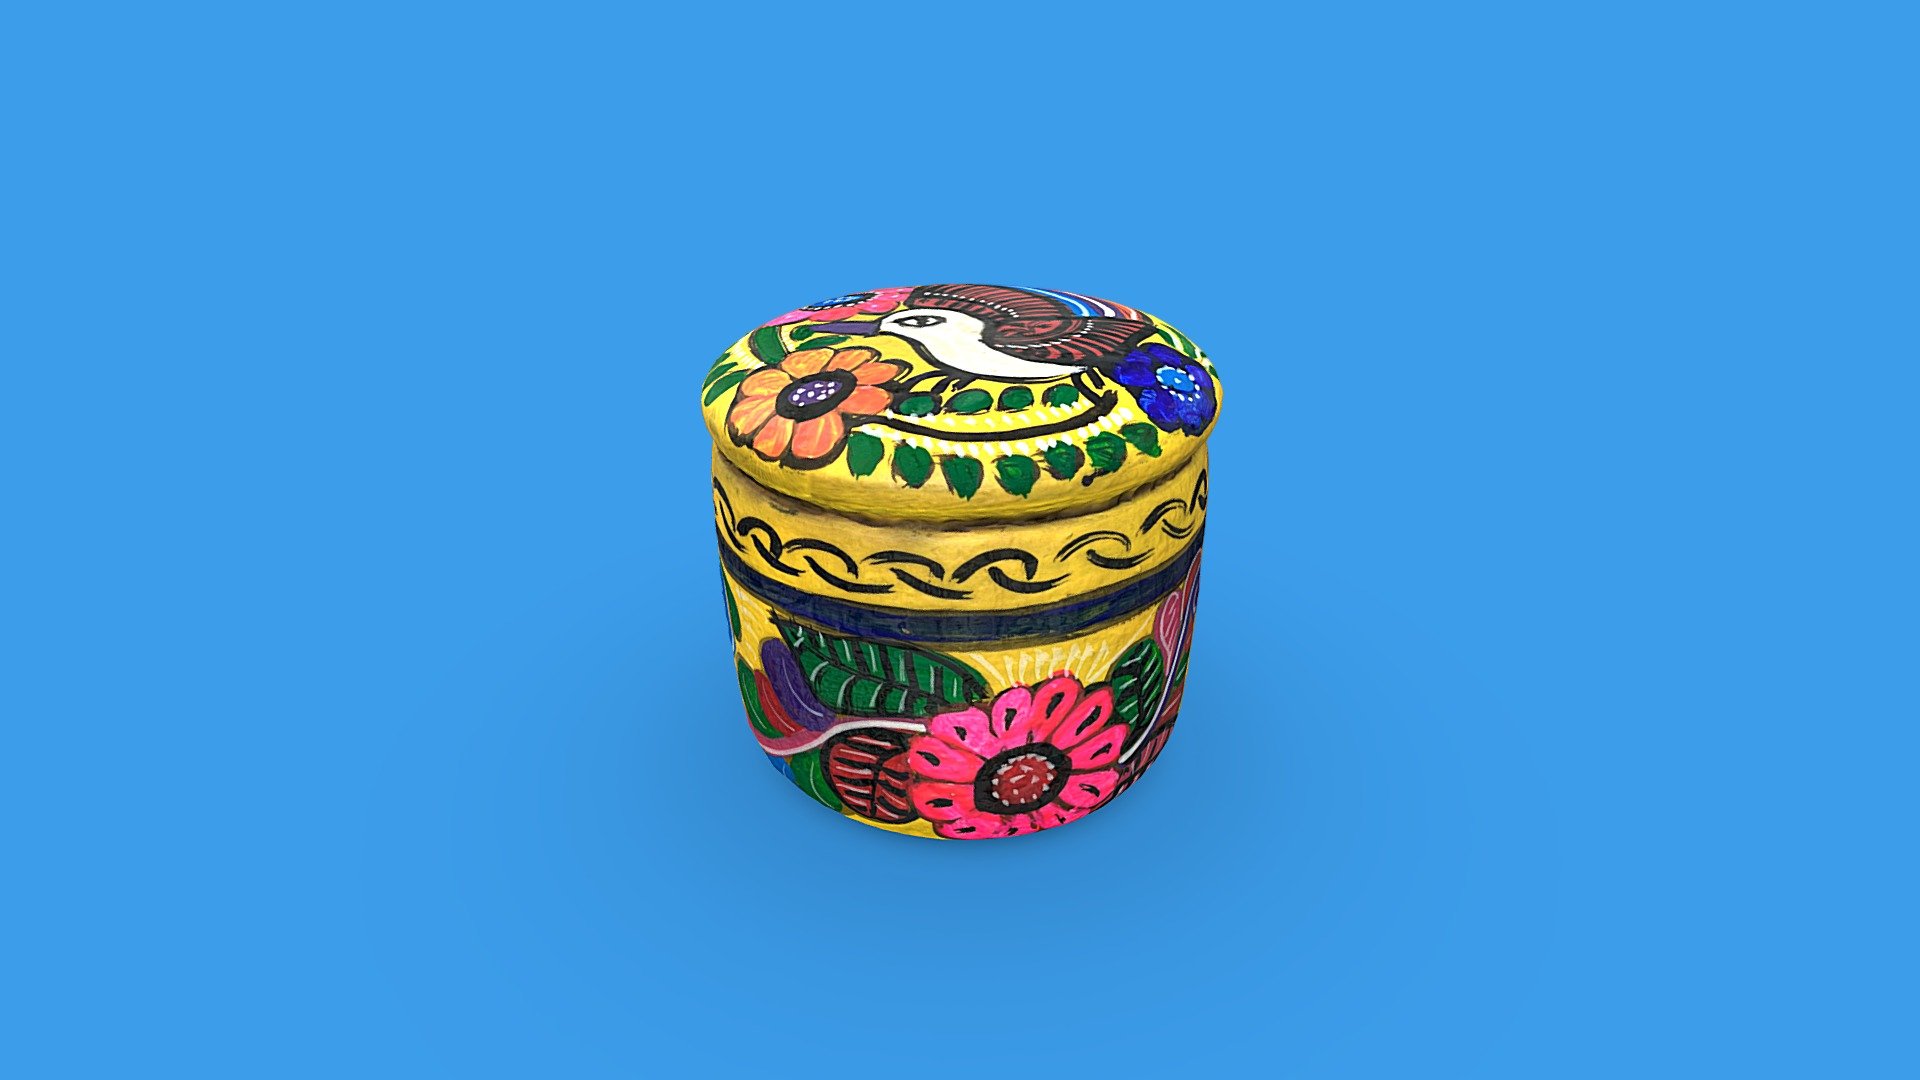 A beautiful hand-painted pottery jar made by a very talented Mexican artist.

This 3D model was processed using our proprietary scanning process. It was then cleaned up using Blender and Substance Painter.

➖

Switch 3D 

Want professional 3D scans of your products? Let's talk! 👉 switch3d.co - Mexican Hand-Painted Pottery Jar - Buy Royalty Free 3D model by Switch 3D (@switch3d) 3d model